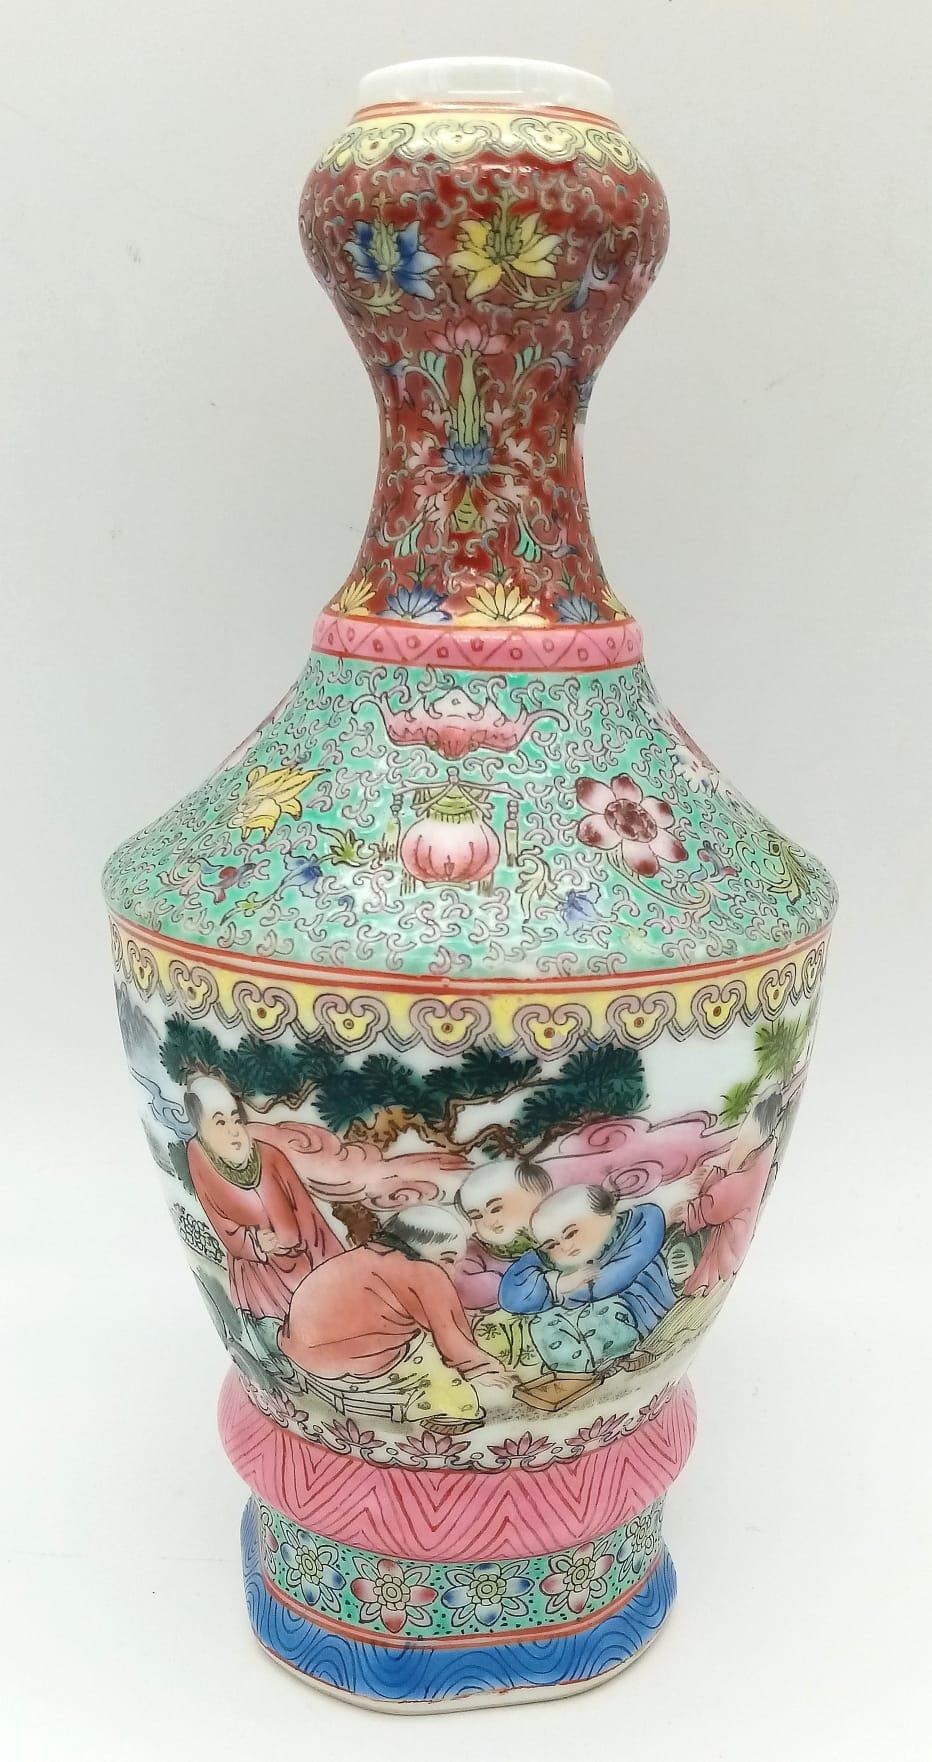 An Antique Chinese Vase. Beautiful hand-painted floral and people scene. Markings on base. 25cm